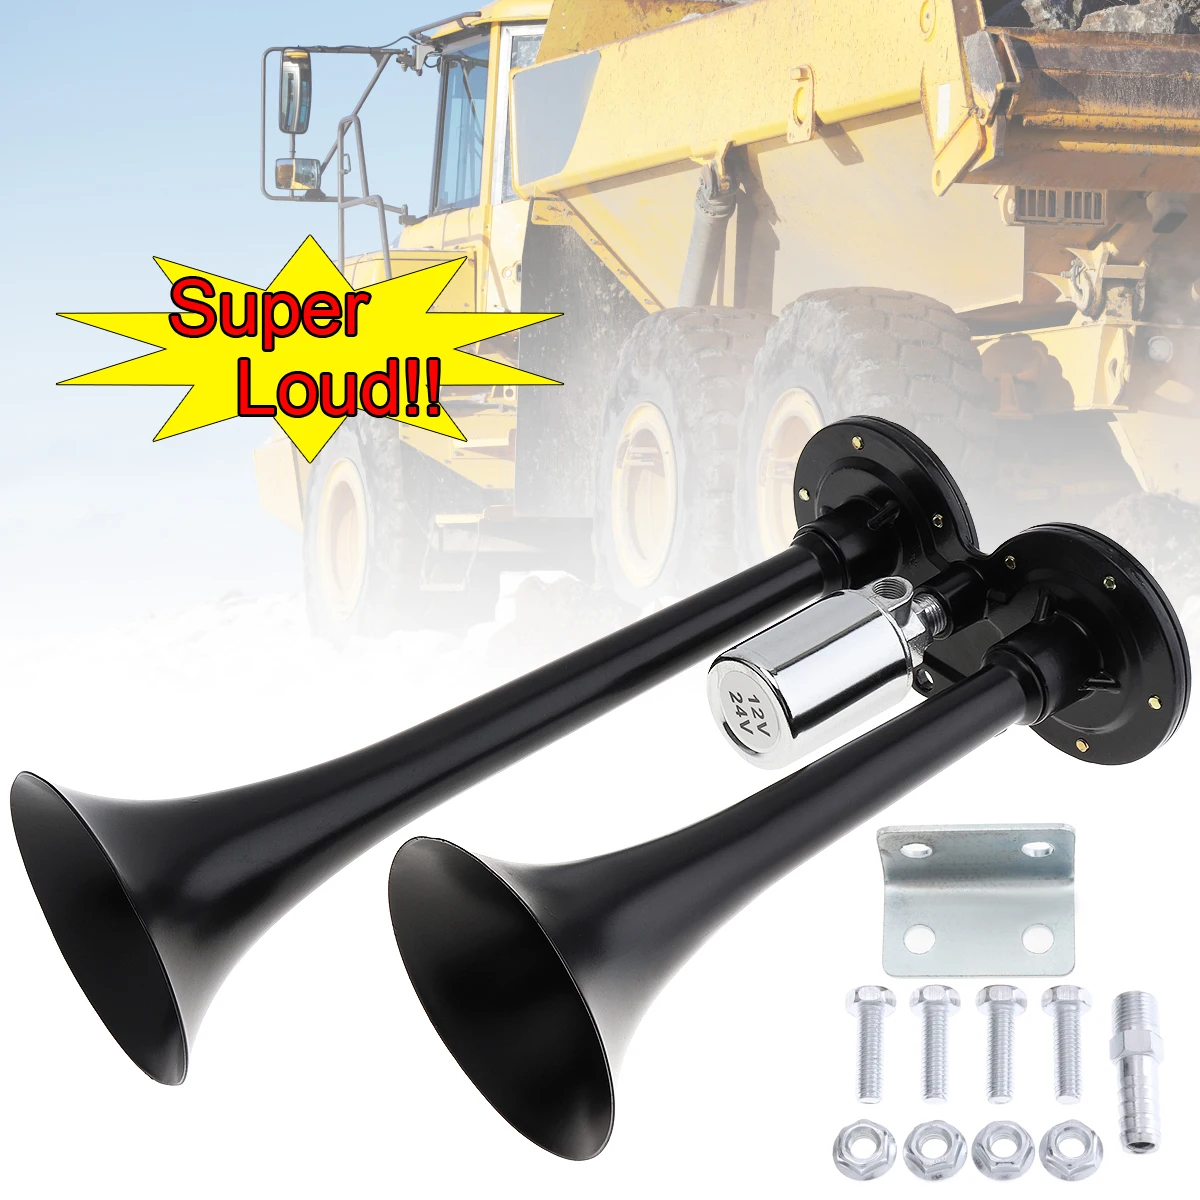 

12V 178dB Super Loud Black Dual Trumpet Electronically Controlled Car Air Horn for Cars Trucks Boats Motorcycles Vehicles